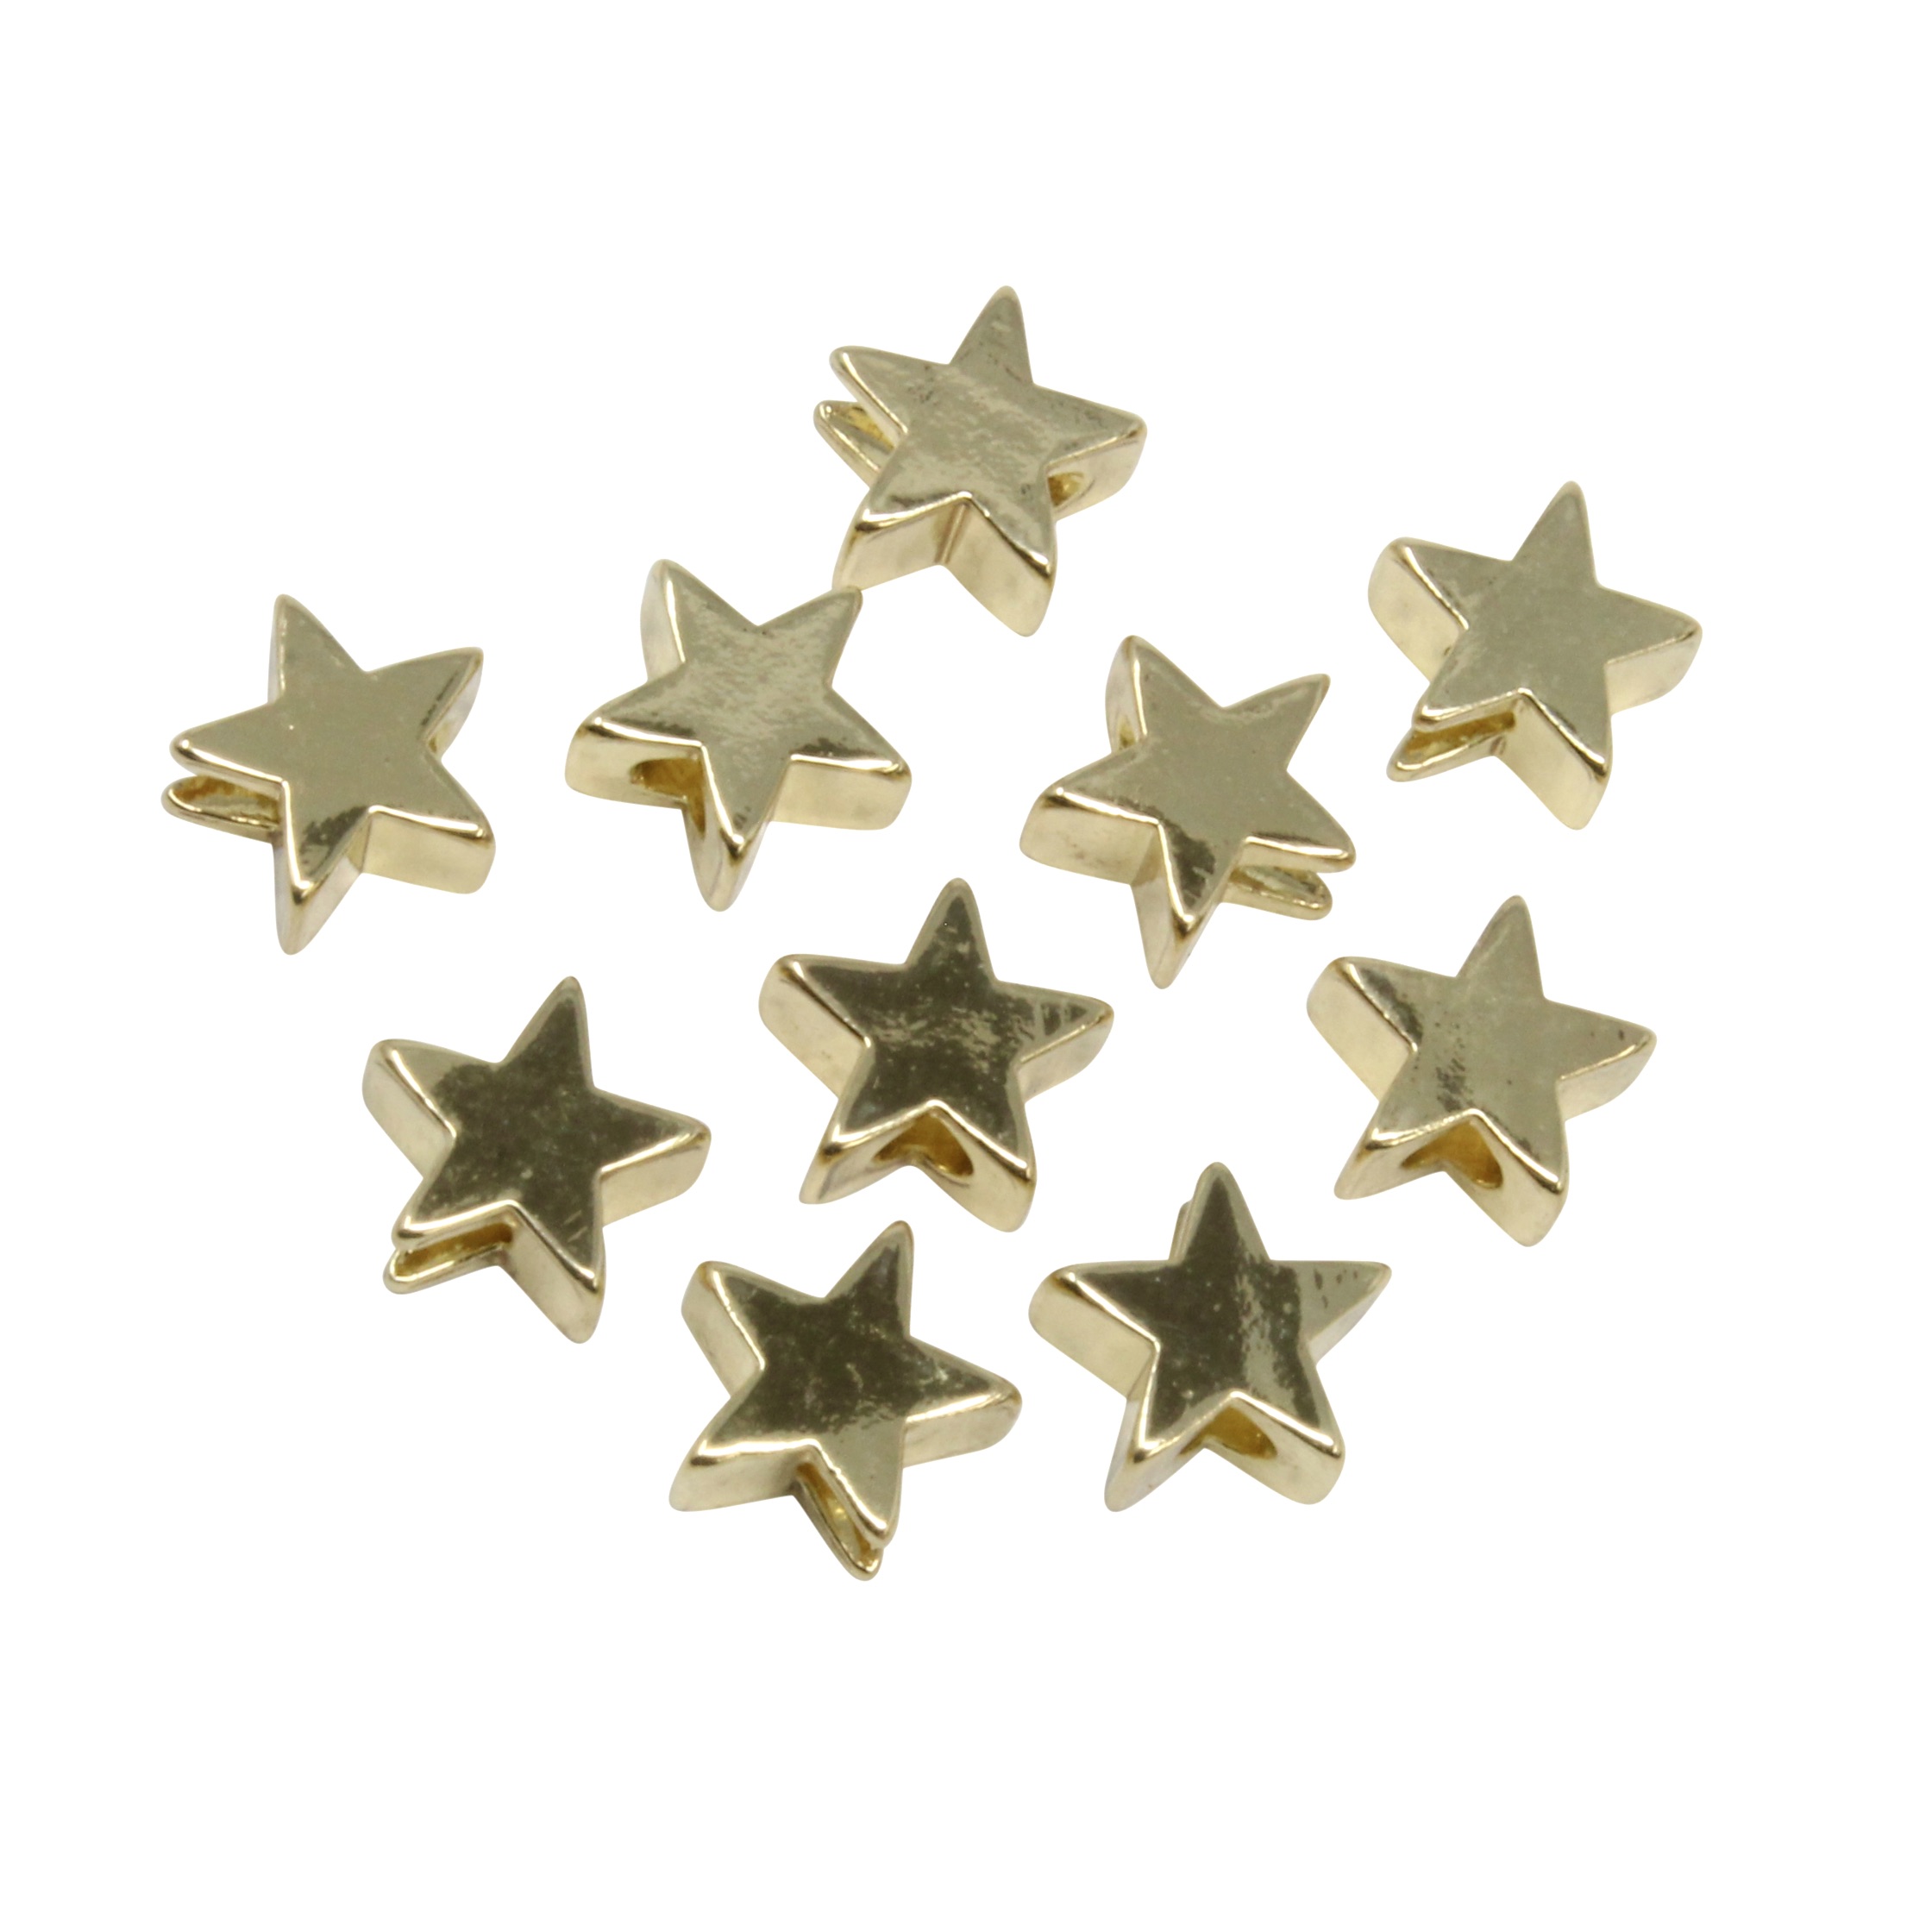 MINI ENAMEL STAR CHARMS FOR JEWELRY MAKING - 10 PACKAGES